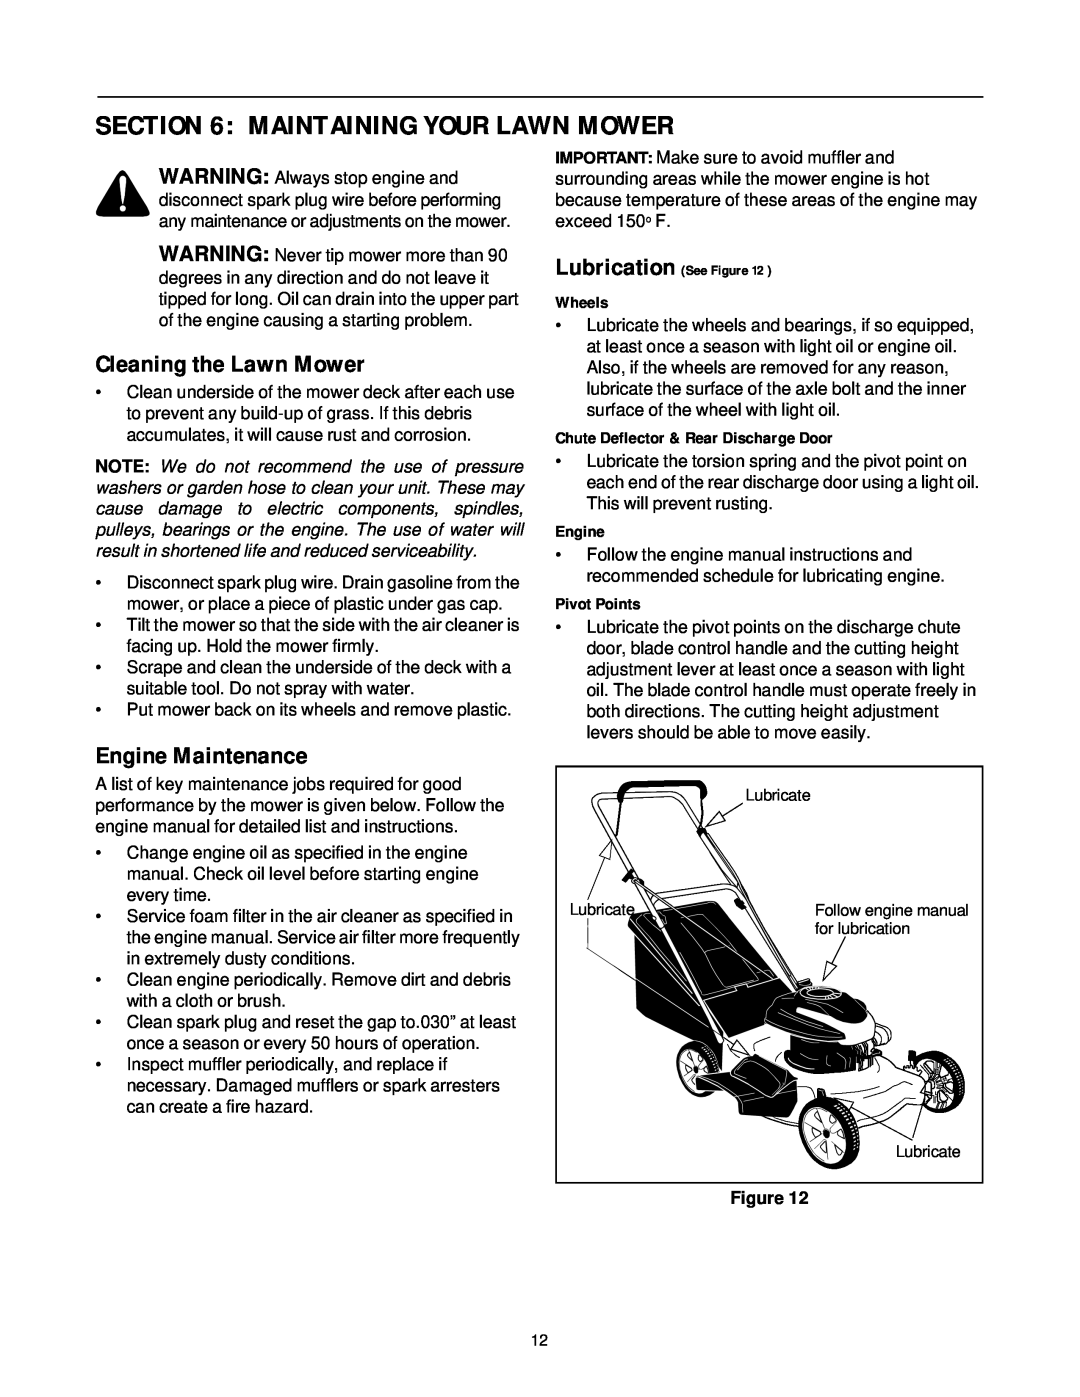 Bolens 436 manual Maintaining Your Lawn Mower, Cleaning the Lawn Mower, Engine Maintenance, Wheels, Pivot Points 